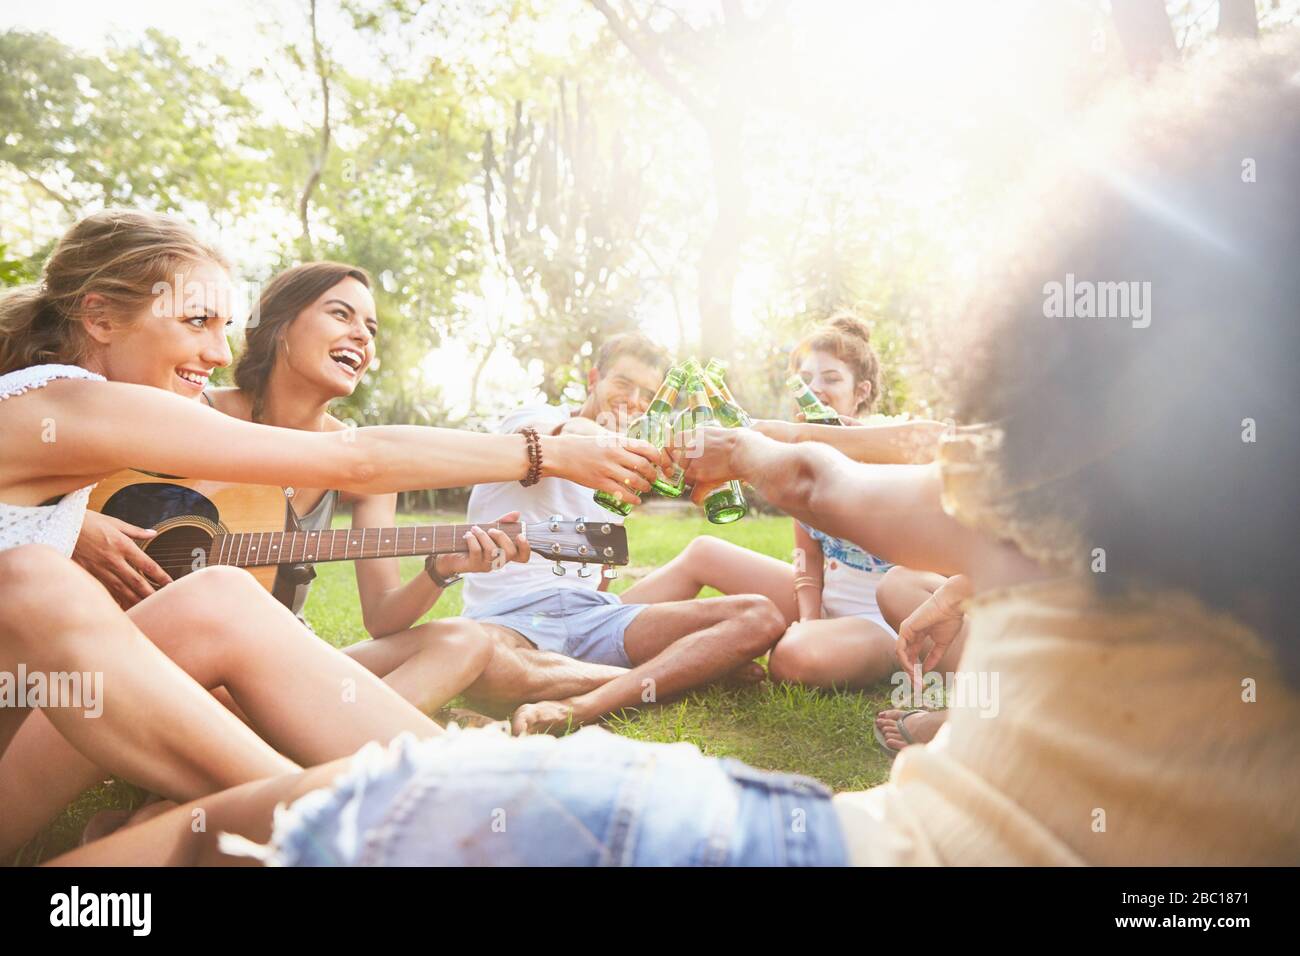 Enthusiastic young friends playing guitar and toasting beer bottles in sunny summer park Stock Photo